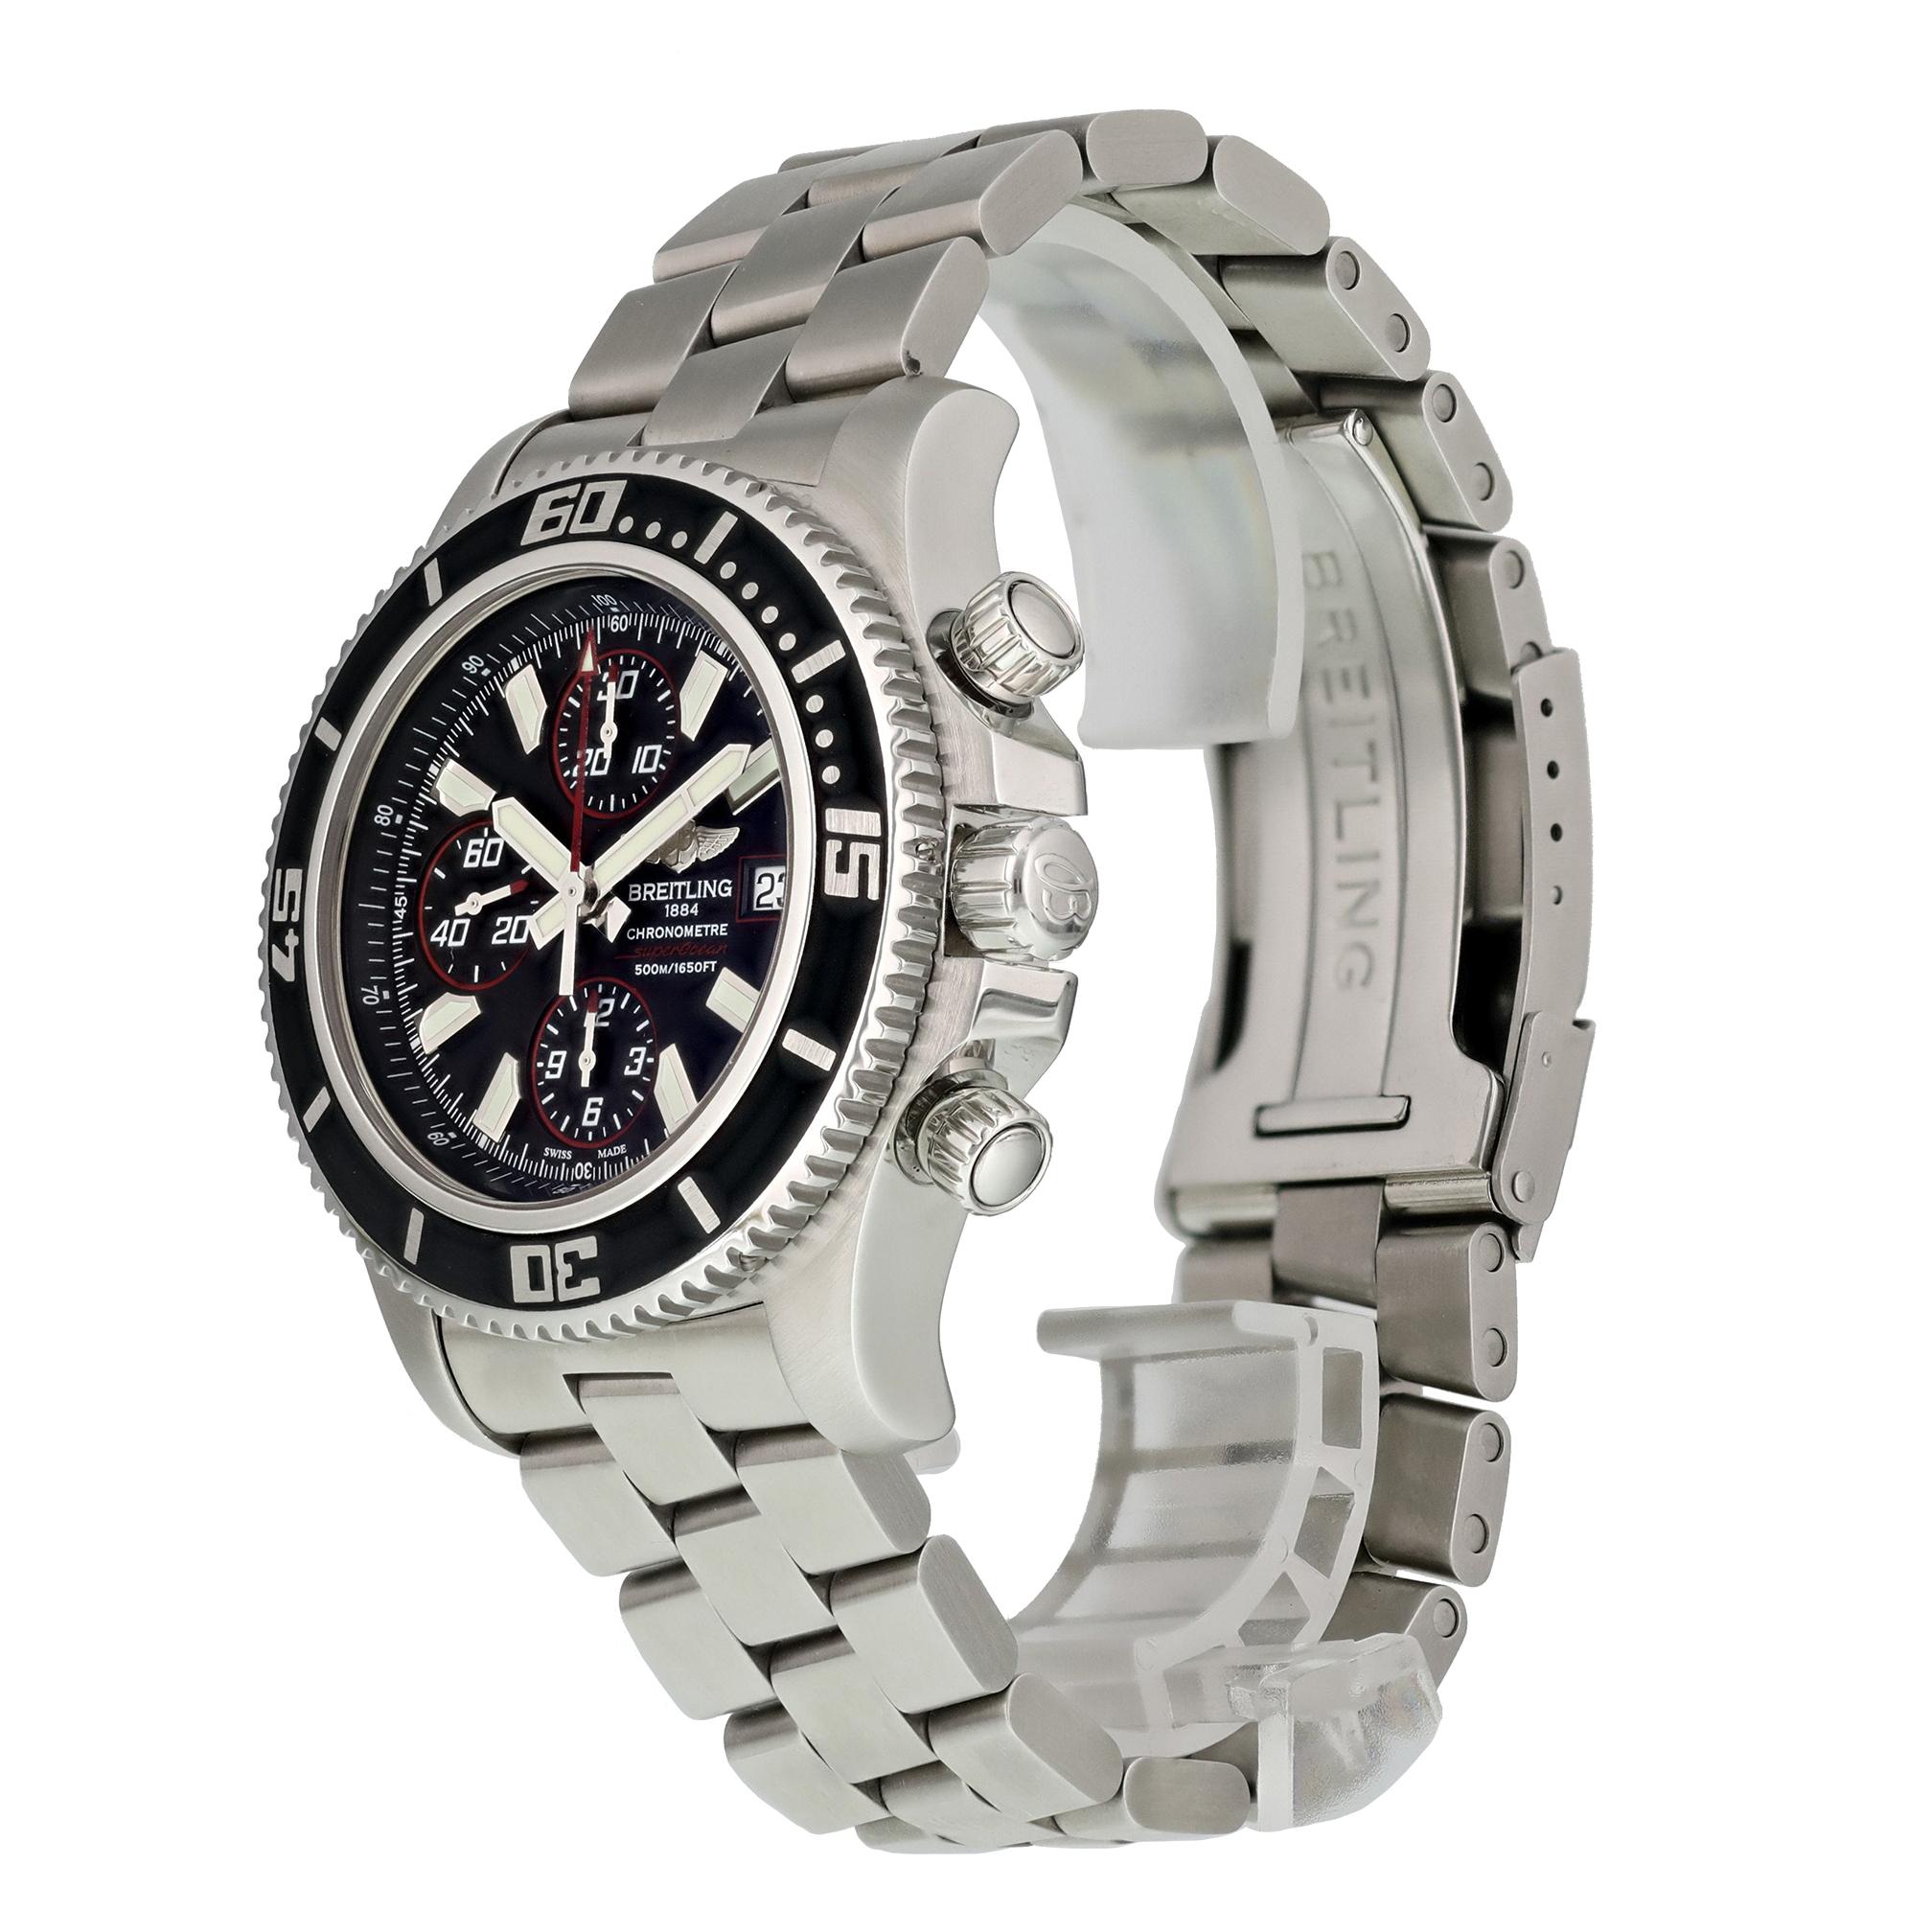 Breitling SuperOcean A13341 Men's Watch. 
47mm Stainless Steel case. 
Stainless Steel Unidirectional bezel. 
Black dial with Luminous Steel hands and index hour markers. 
Minute markers on the outer dial. 
Date display at the 3 o'clock position.